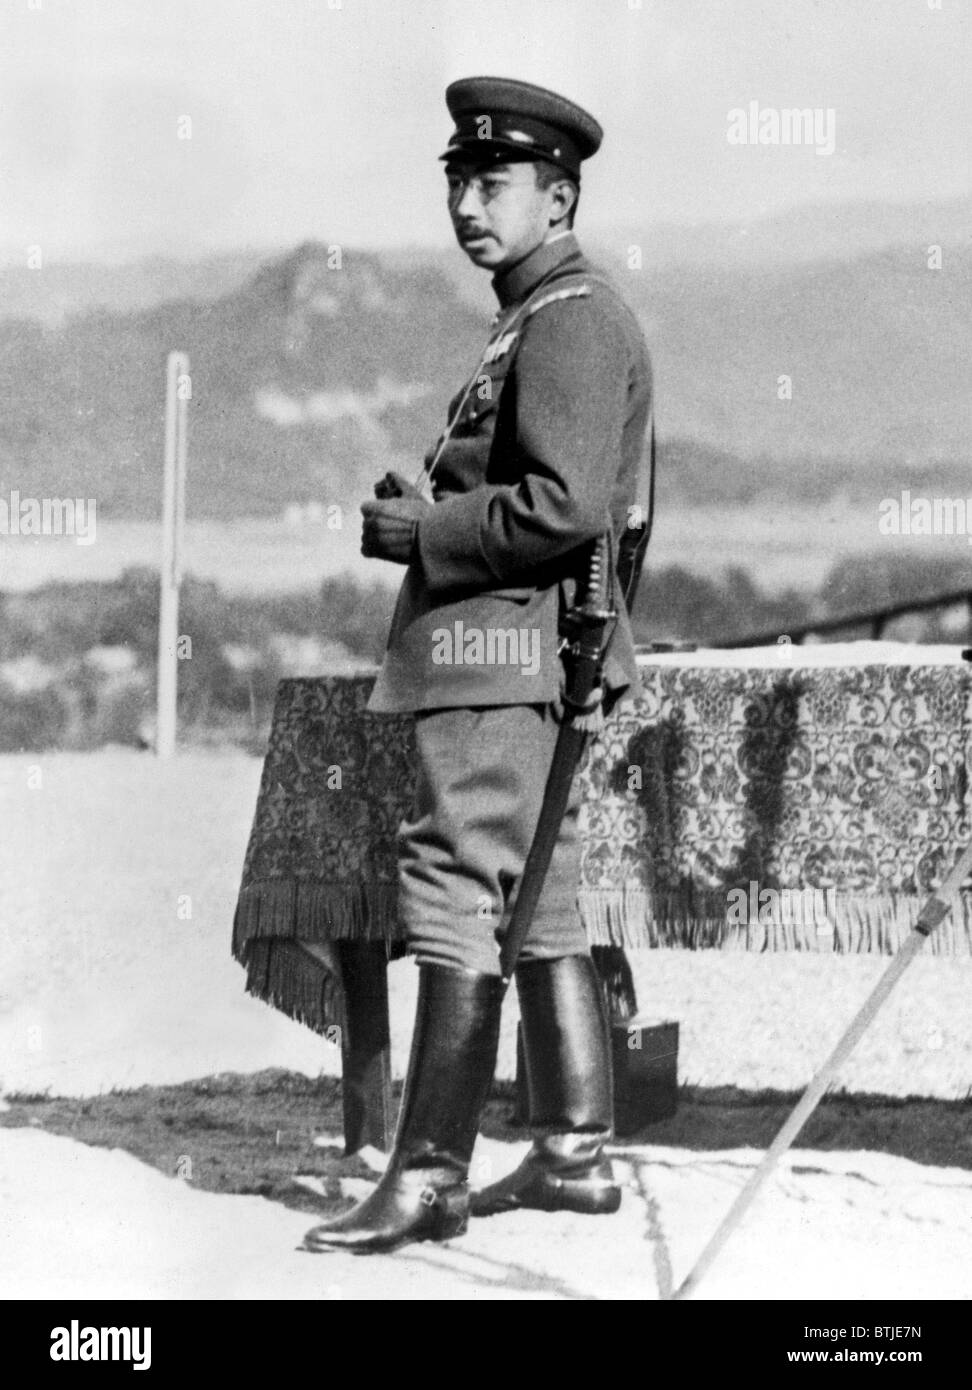 JAPANESE EMPEROR AT WAR MANEUVERS  His Imperial Majesty Emperor Hirohito of Japan was an ineterested spectator during the recent Stock Photo